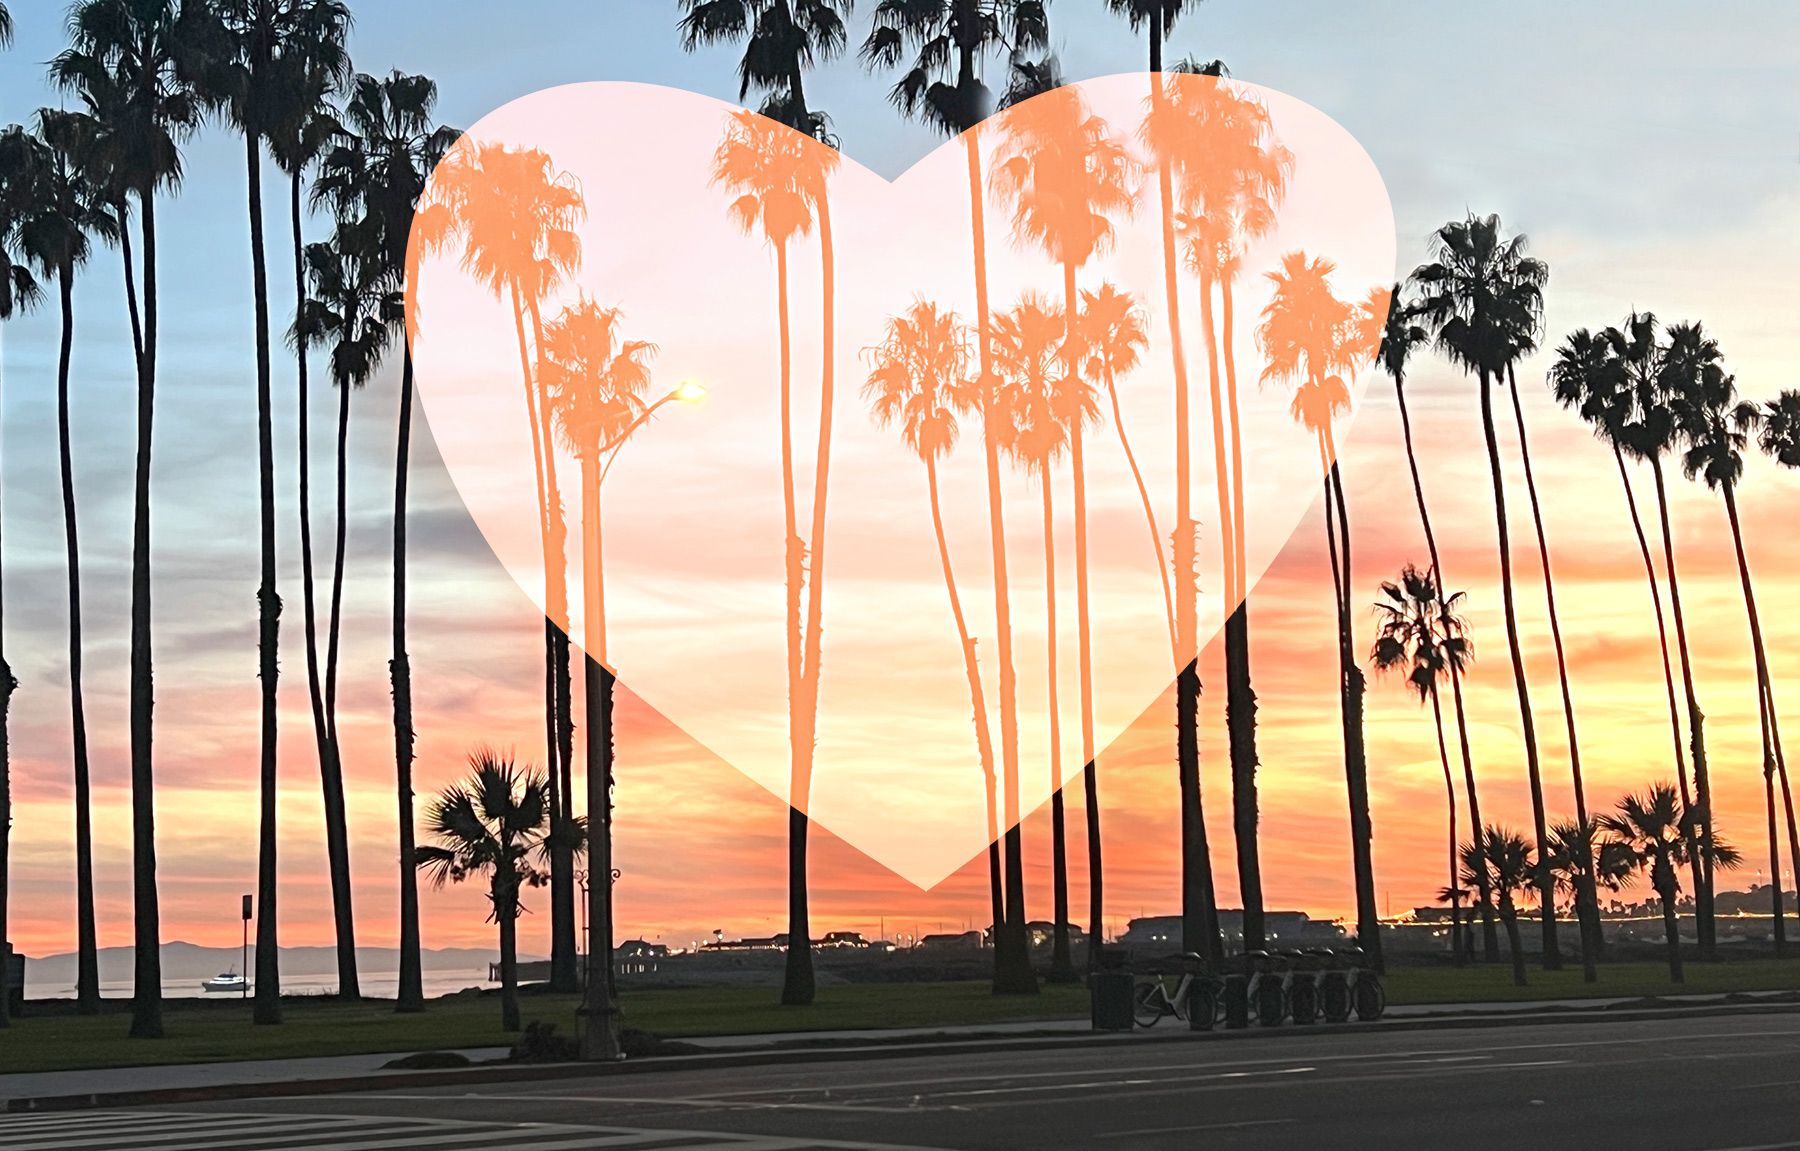 Santa Barbara shoreline at sunset, with a row of palm trees, and with a semi-transparent heart superimposed.